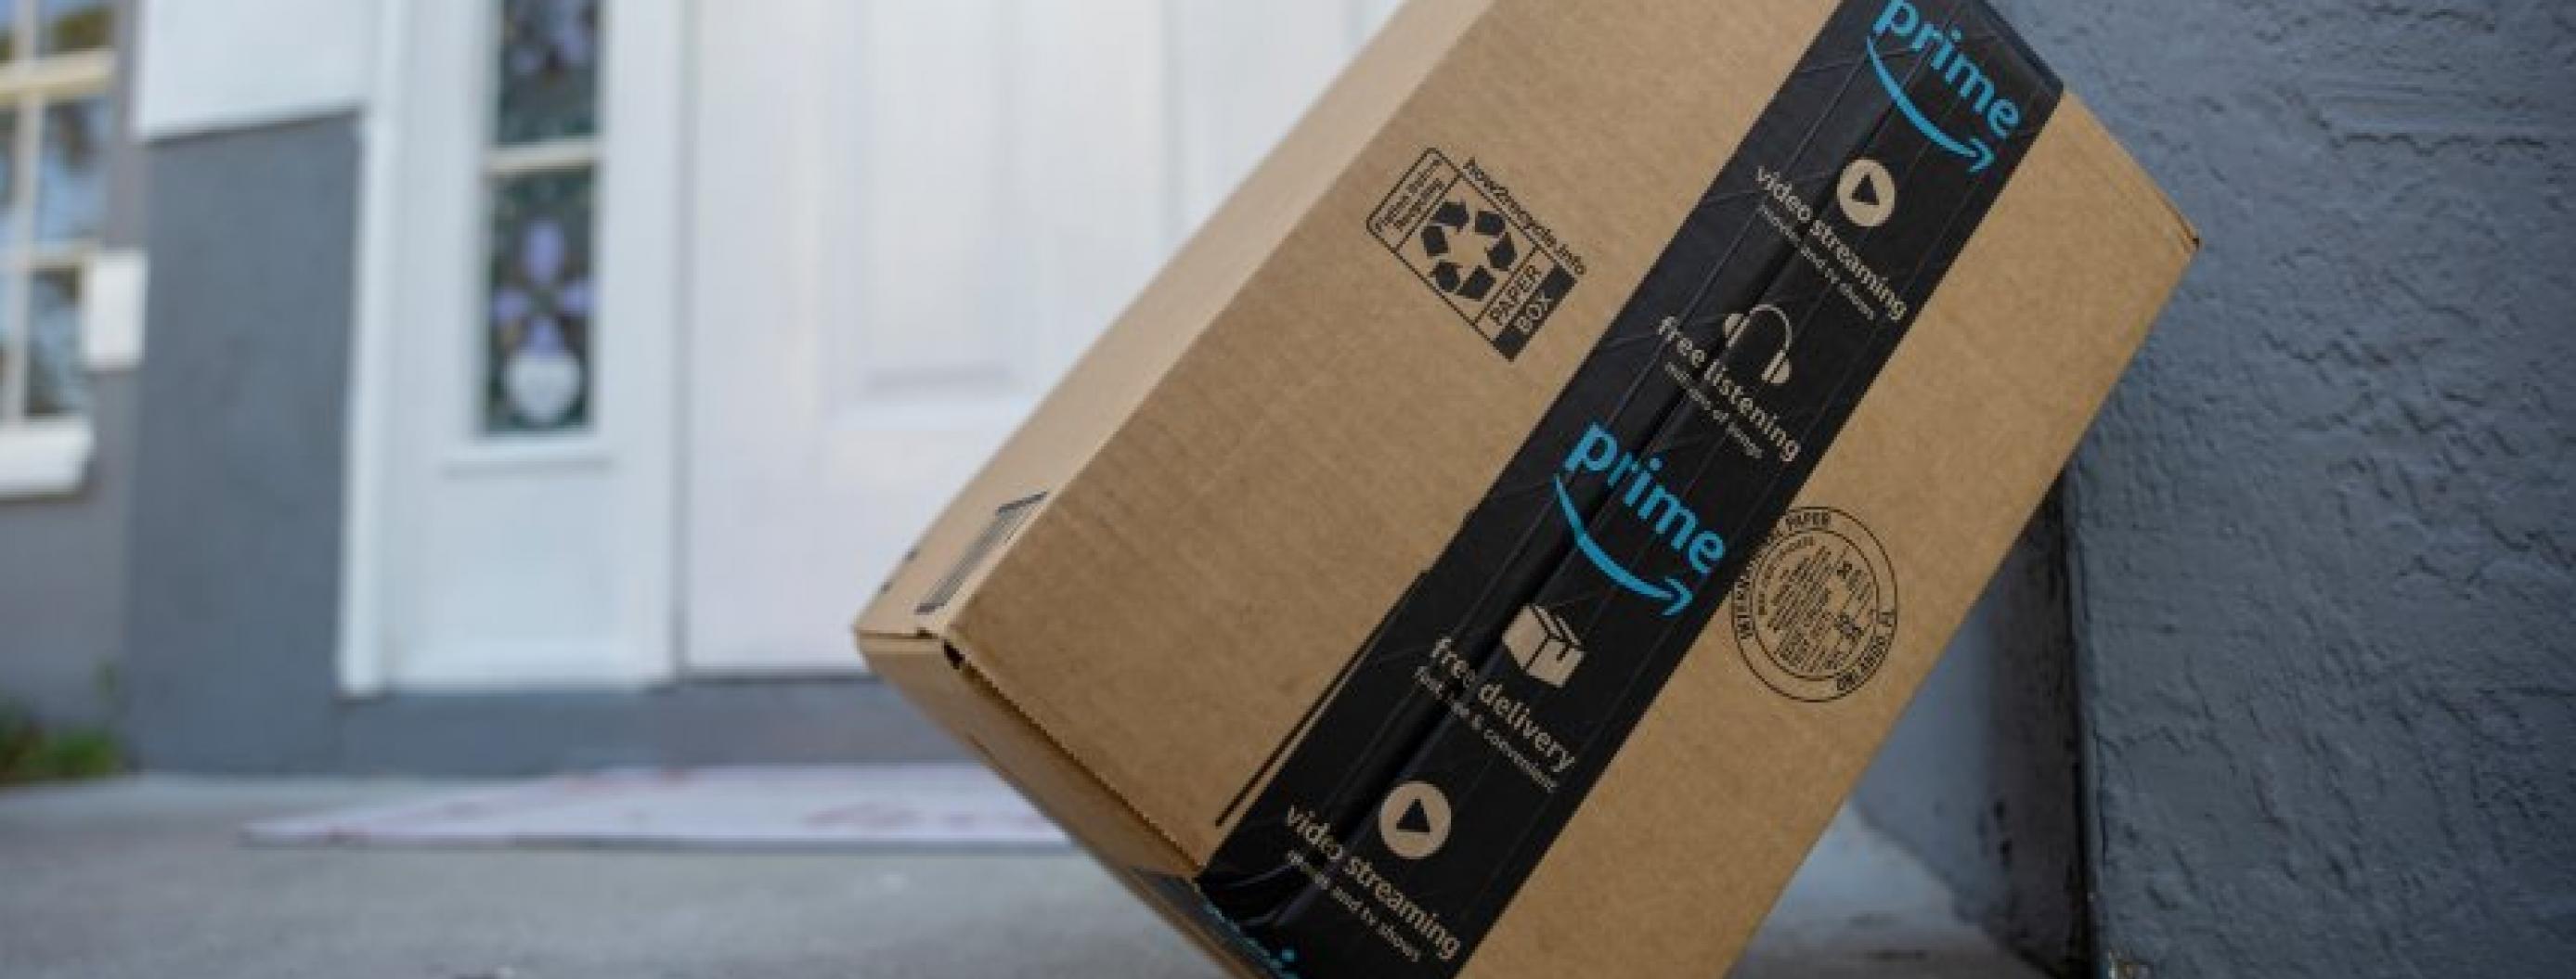 Amazon Is Being Accused Of Enrolling Consumers In Prime Without Consent